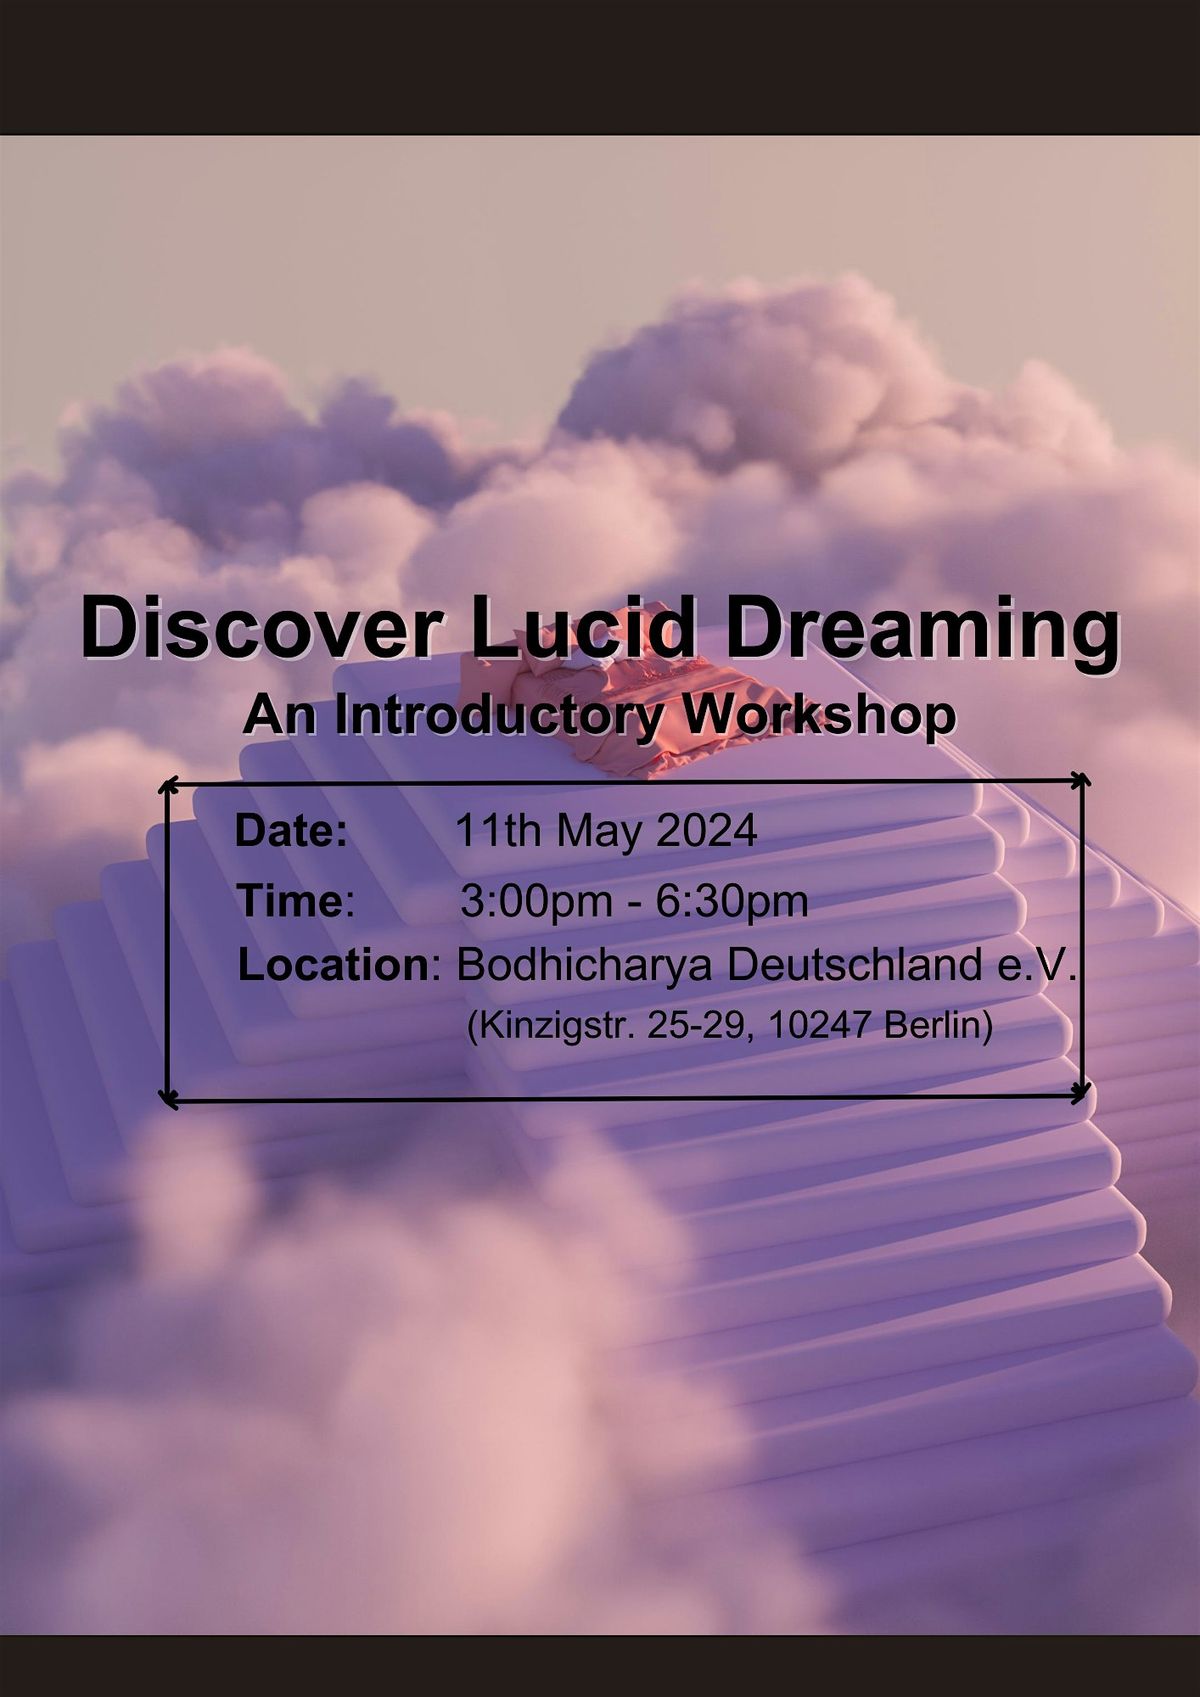 Discover Lucid Dreaming: An Introductory Workshop